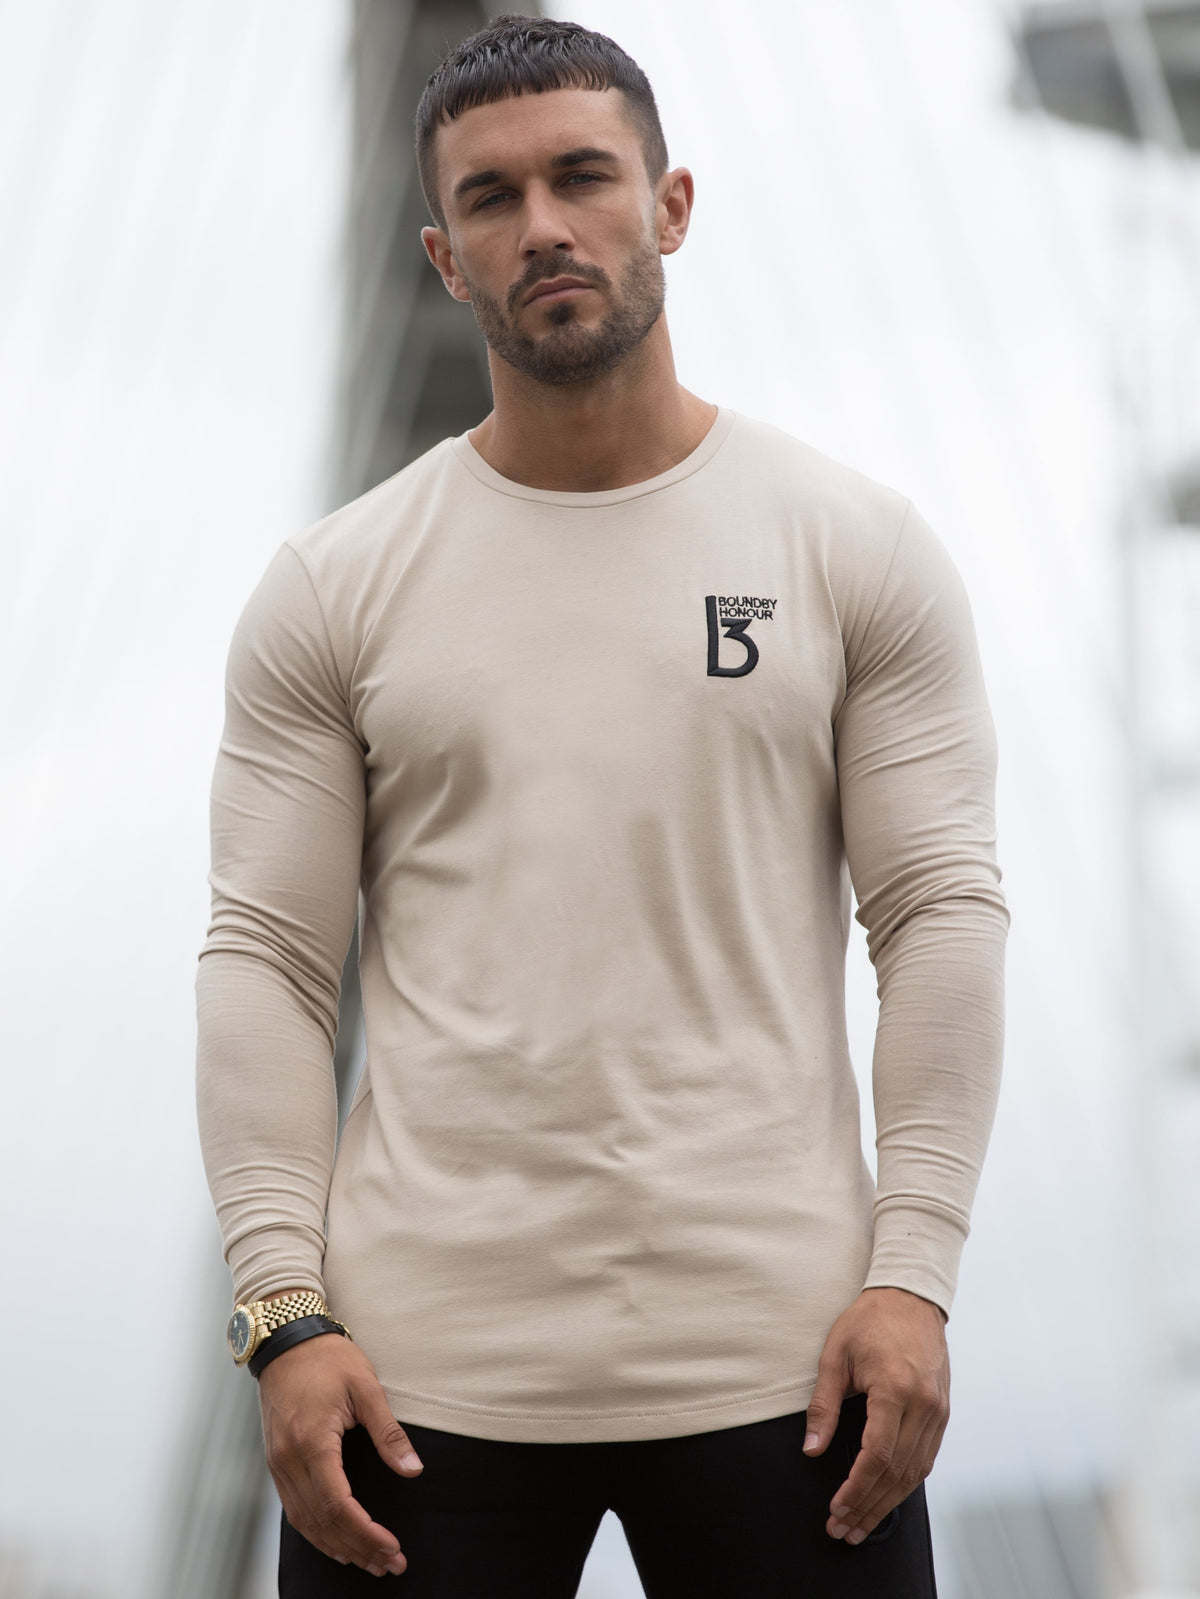 BLT25 ABSORB Copy of Absorb Long Sleeve T-Shirt | Bound By Honour Bound By Honour RAWDENIM